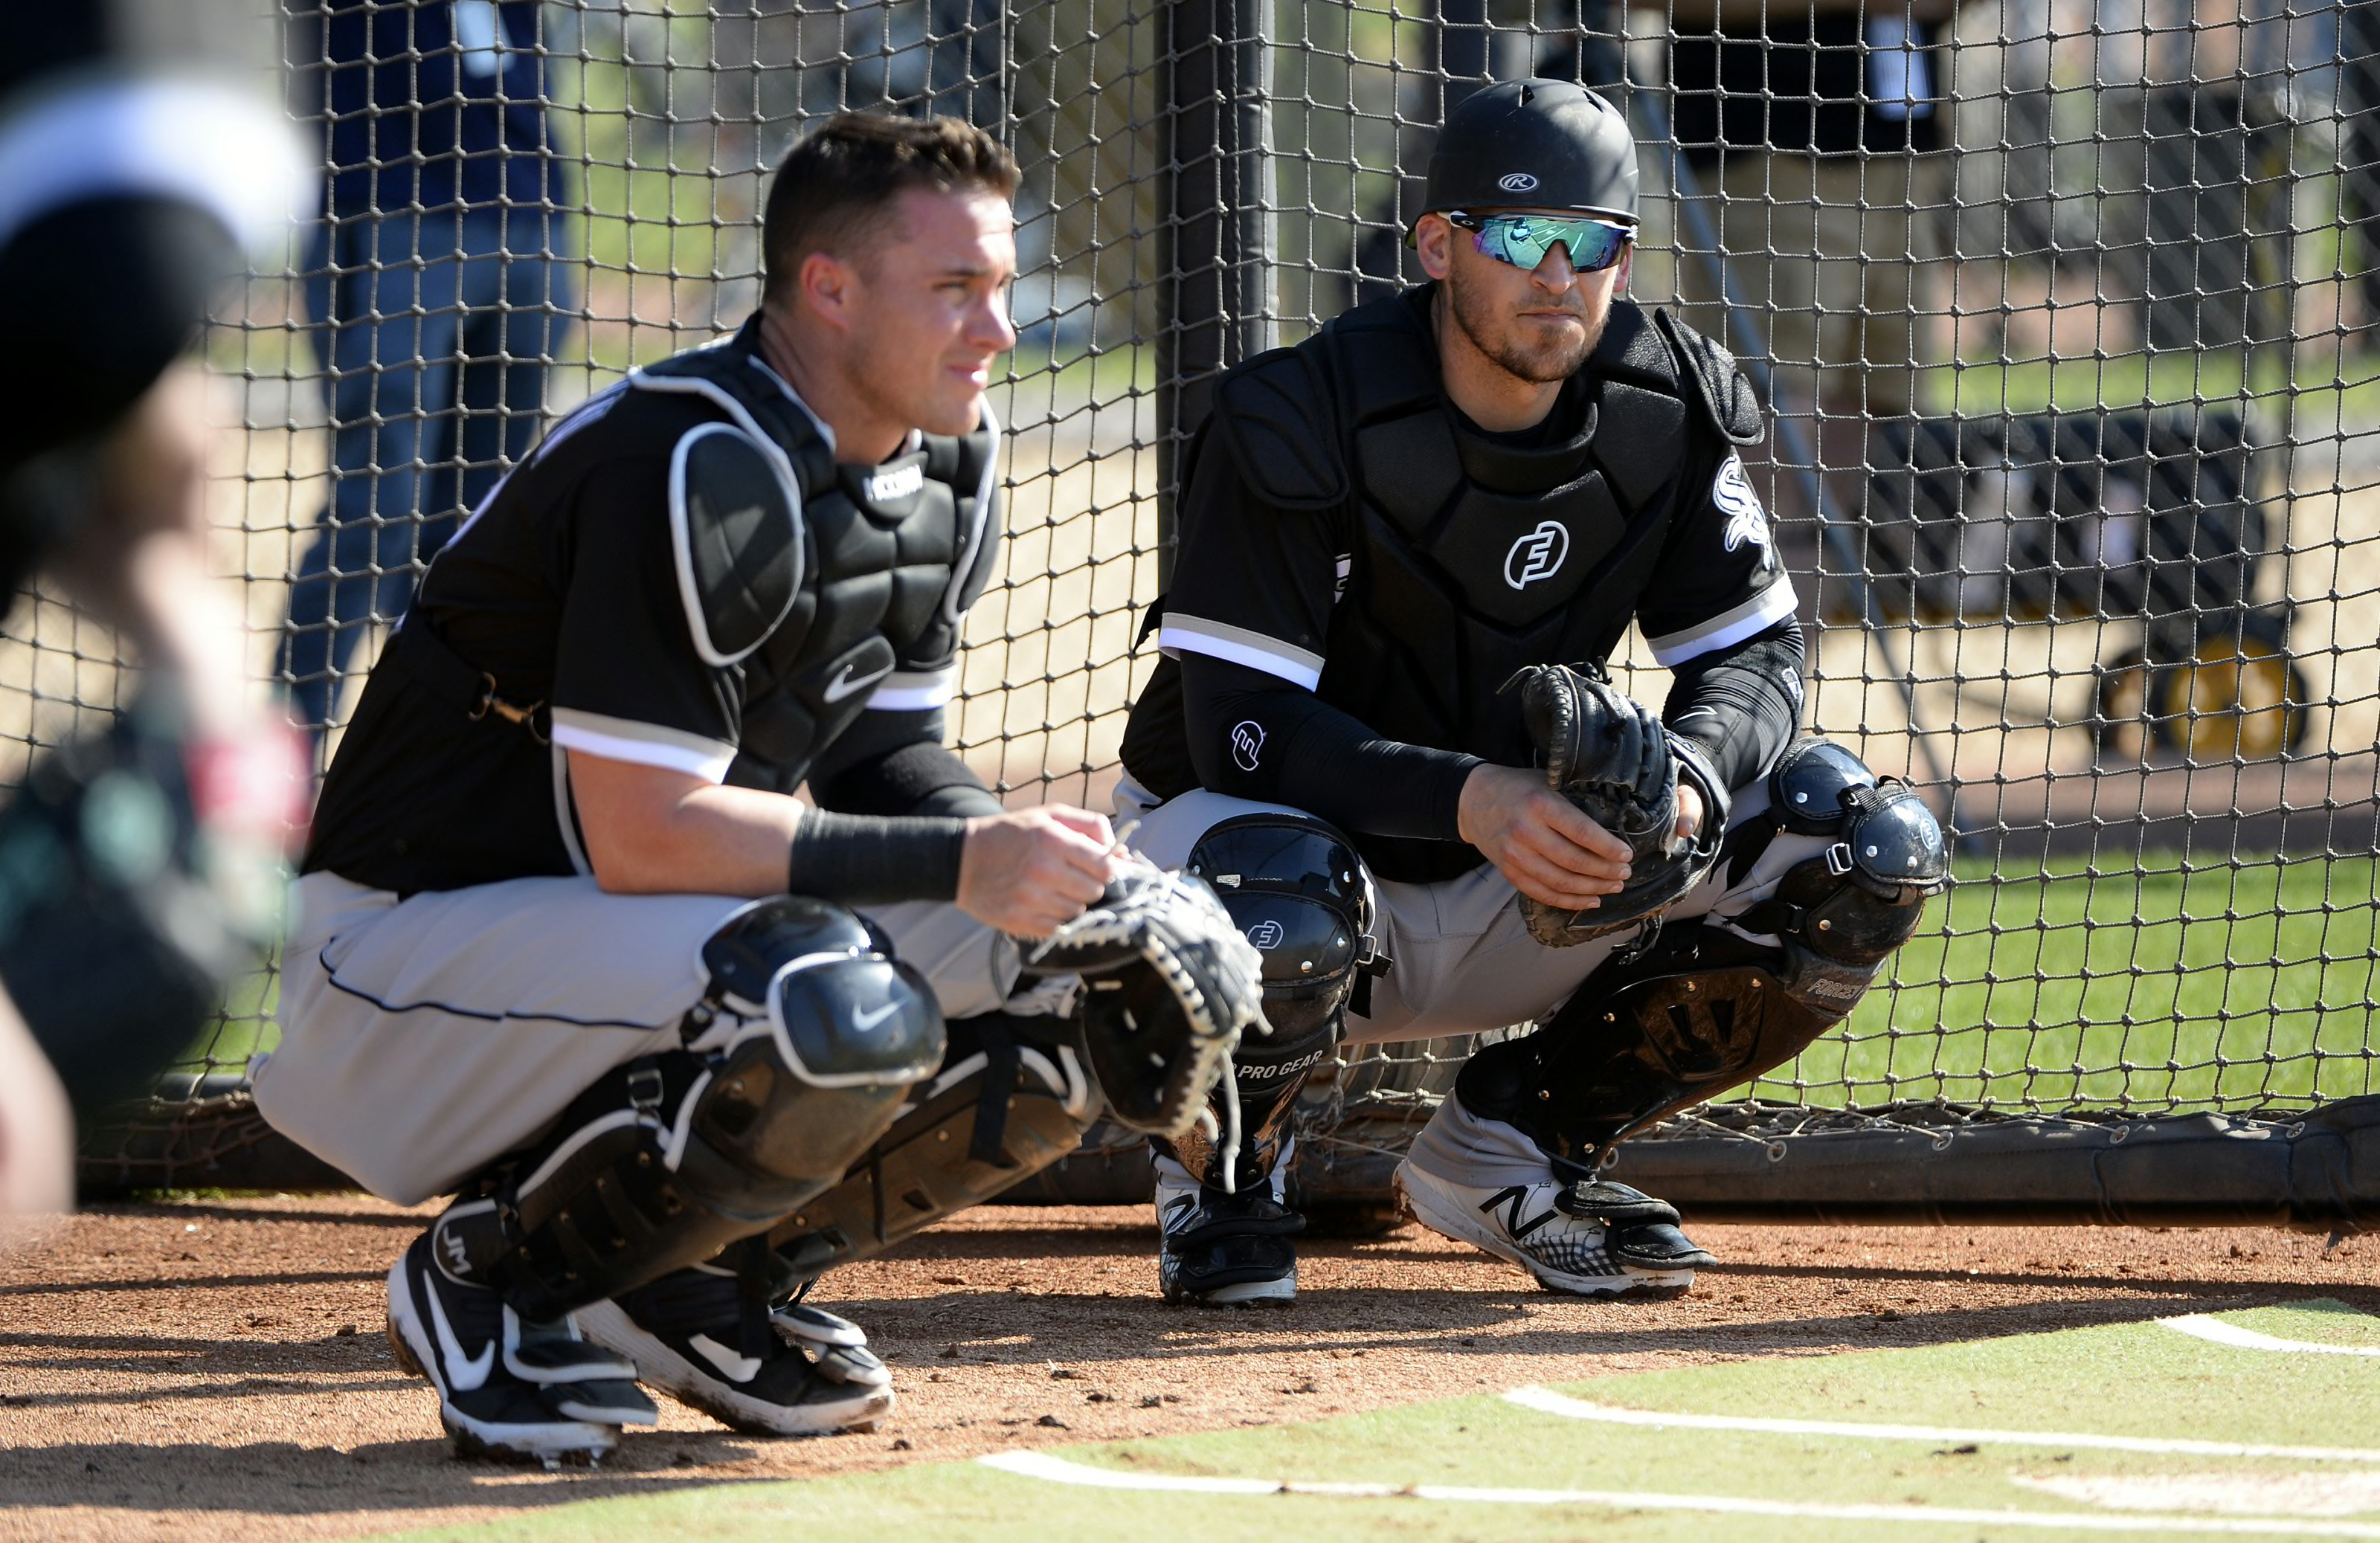 3 new potential backup catchers for the Chicago White Sox